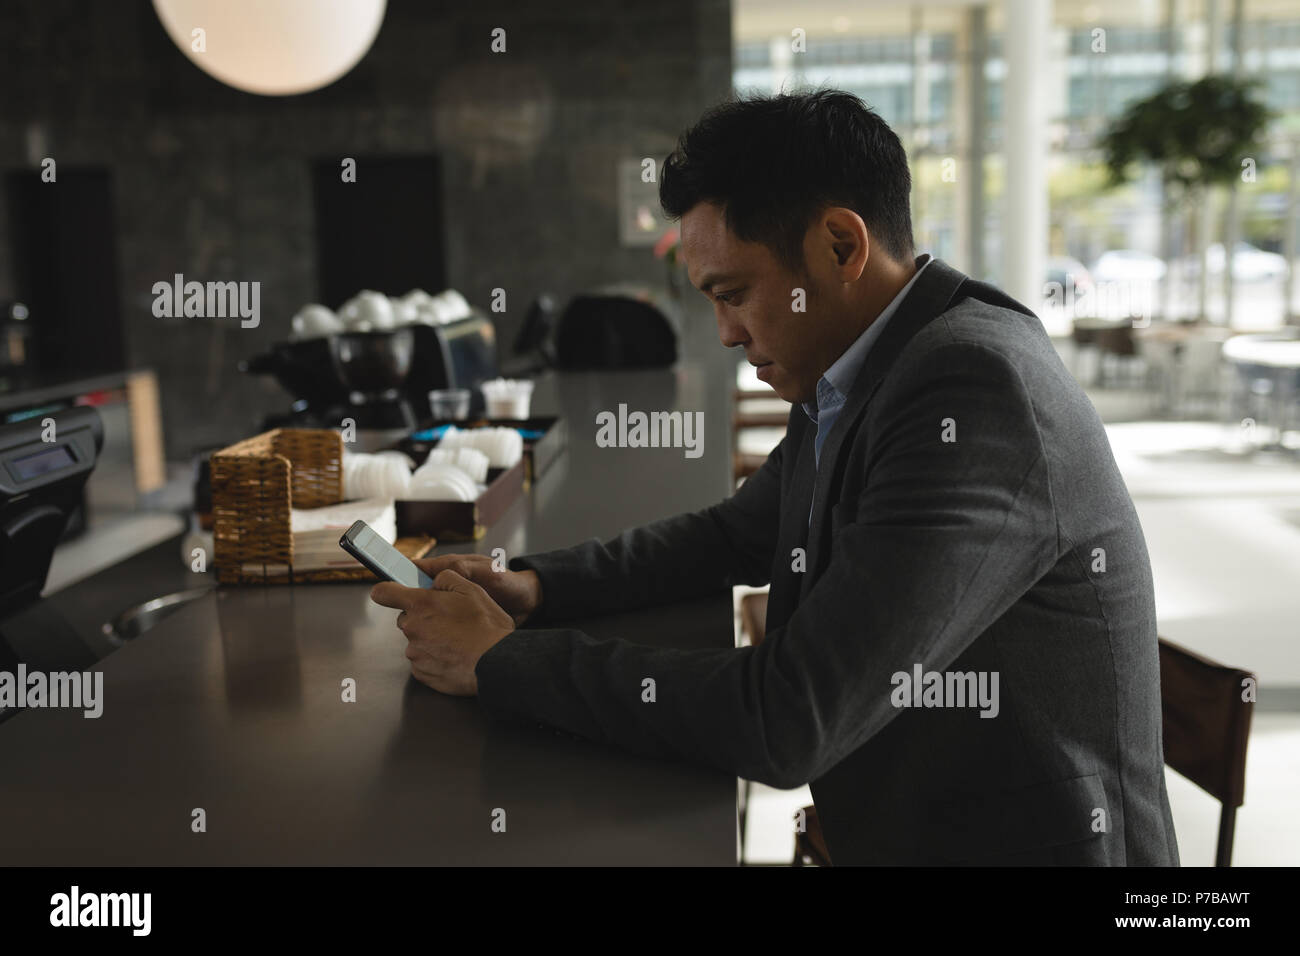 Businessman using his phone at the cafeteria counter Stock Photo